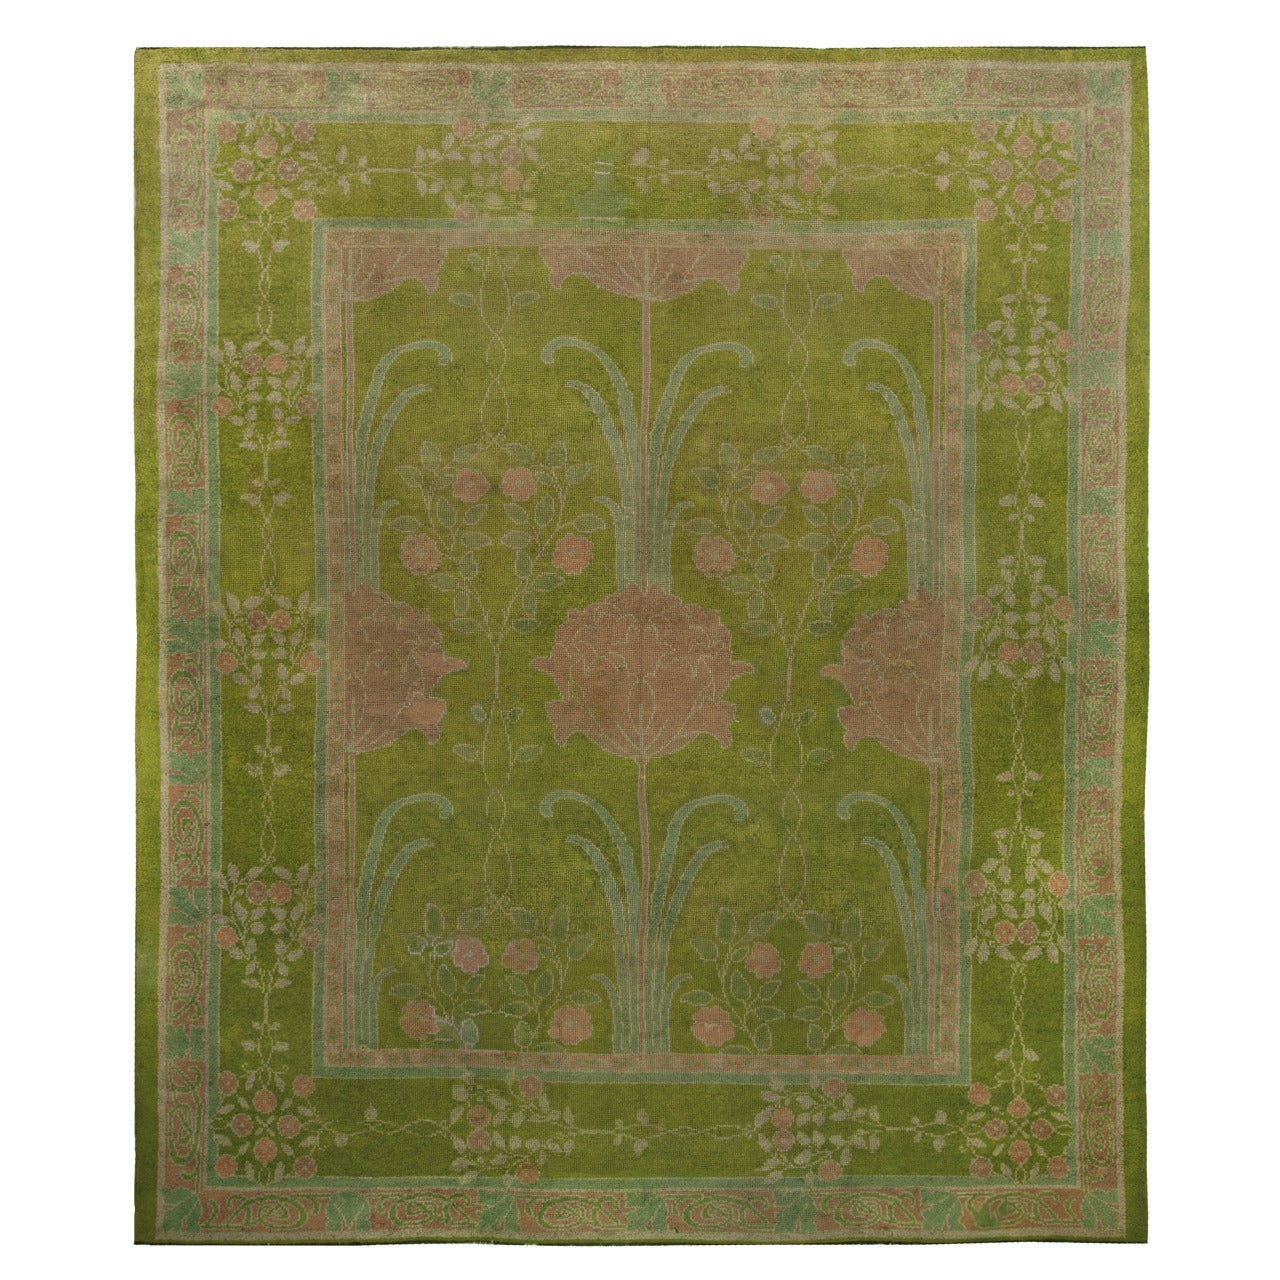 Arts & Crafts Voysey Donegal Rug in Stunning Green